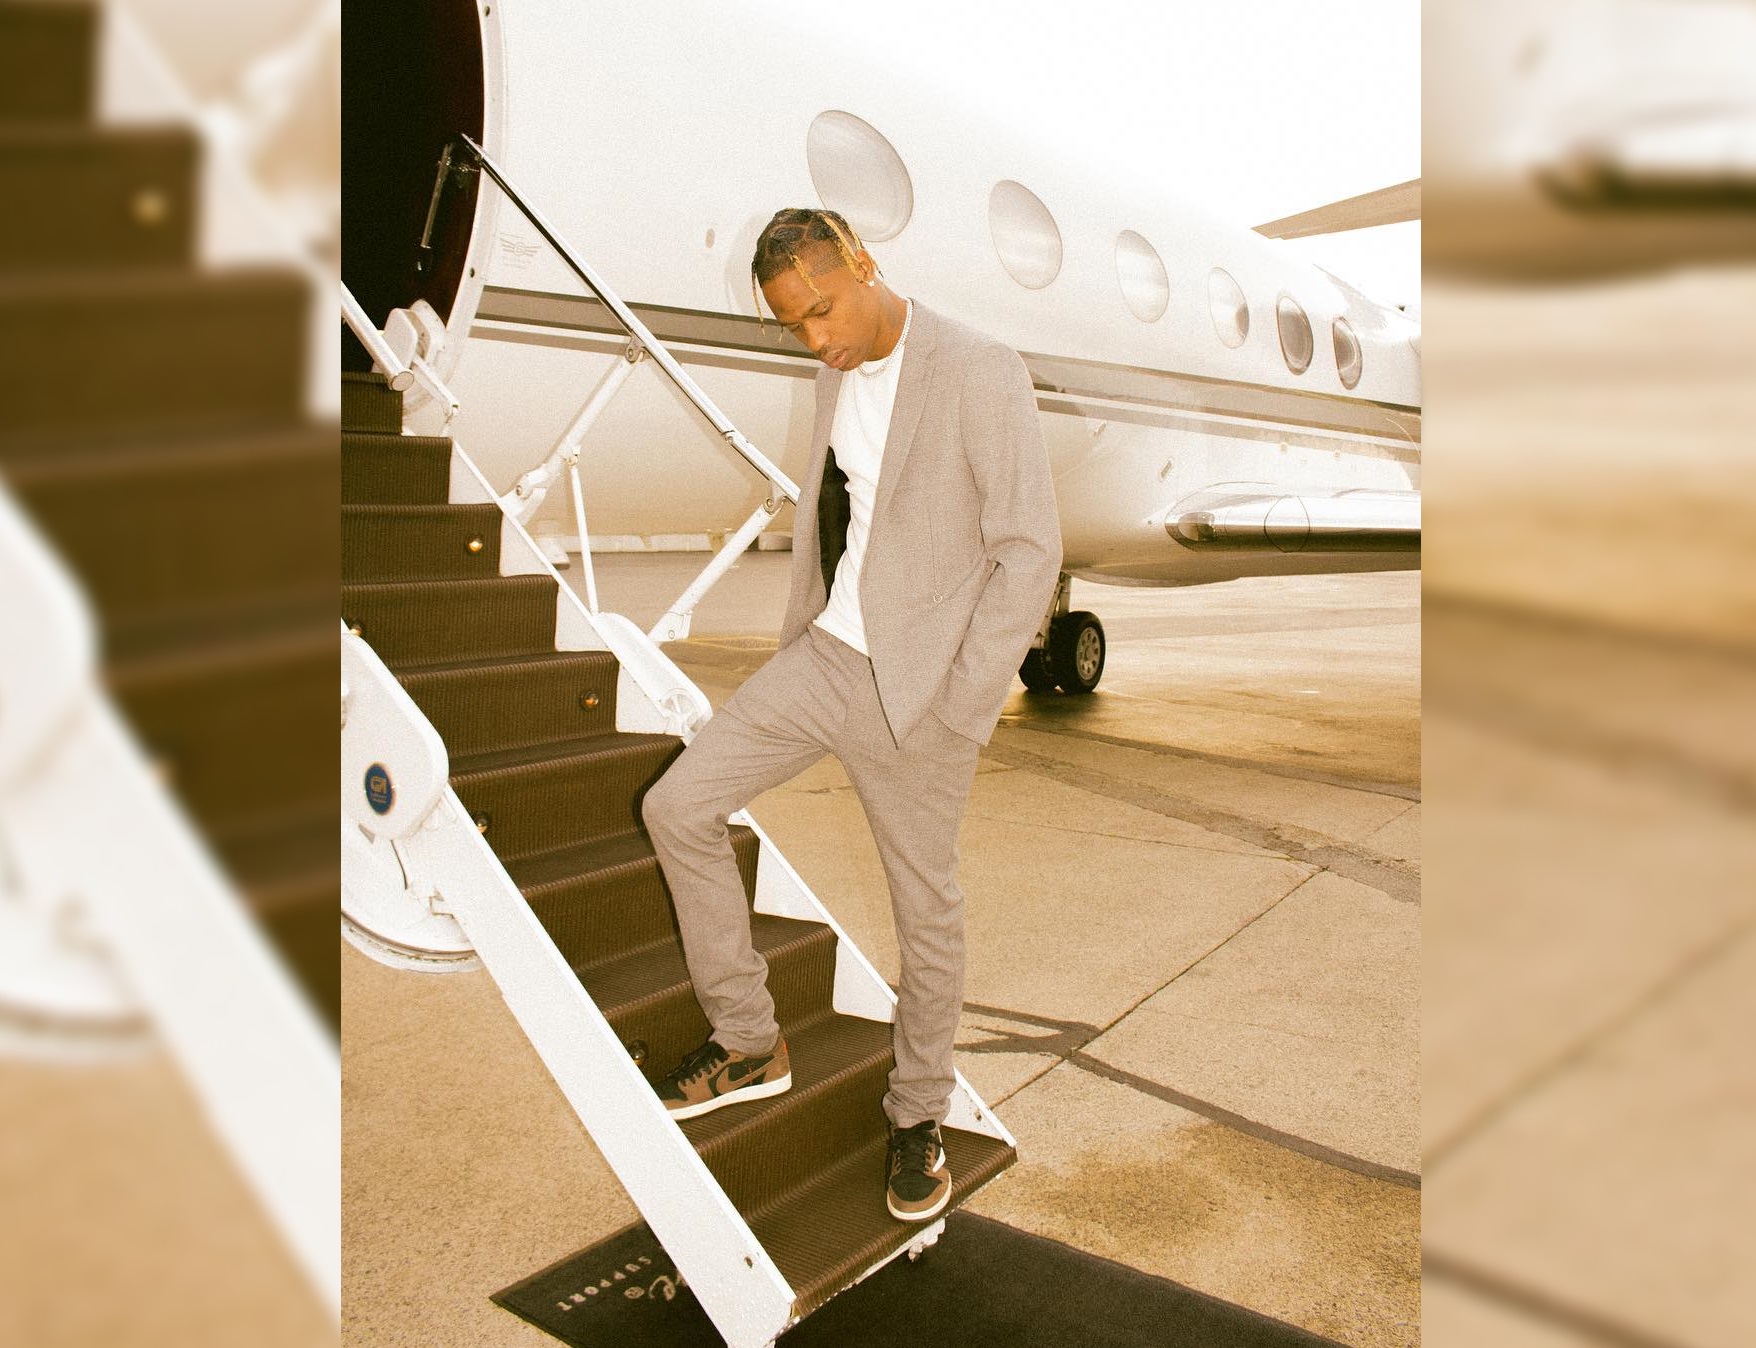 SPOTTED: Travis Scott Rocks Formal Fit with his Upcoming Collaborative Nikes